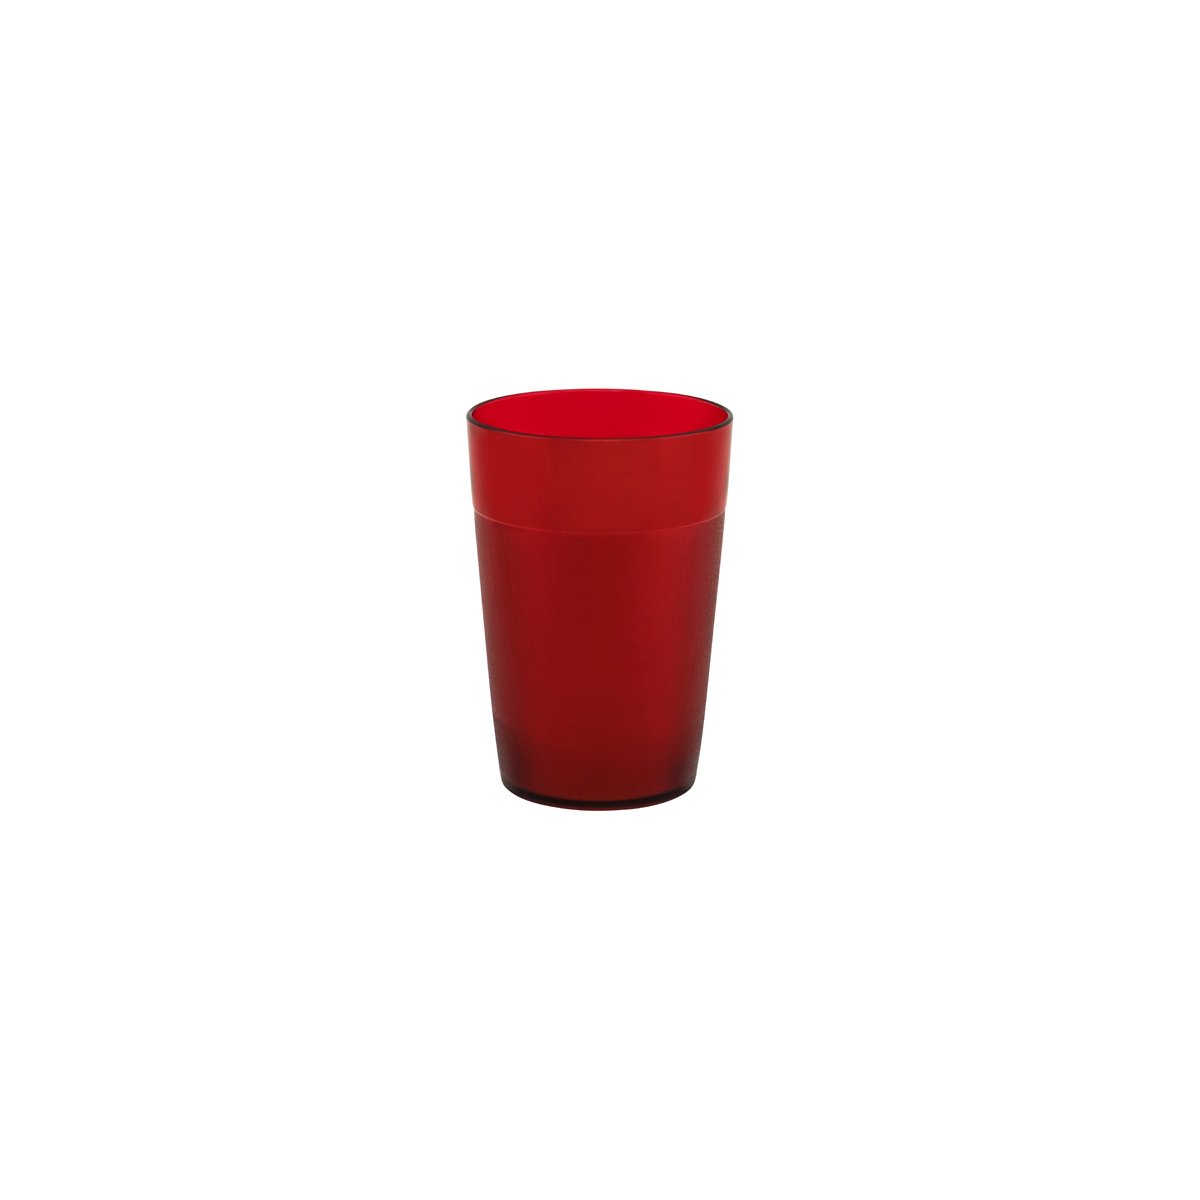 ROLTEXR103R Roltex Polycarbonate Tumbler Red 250ml Tomkin Australia Hospitality Supplies